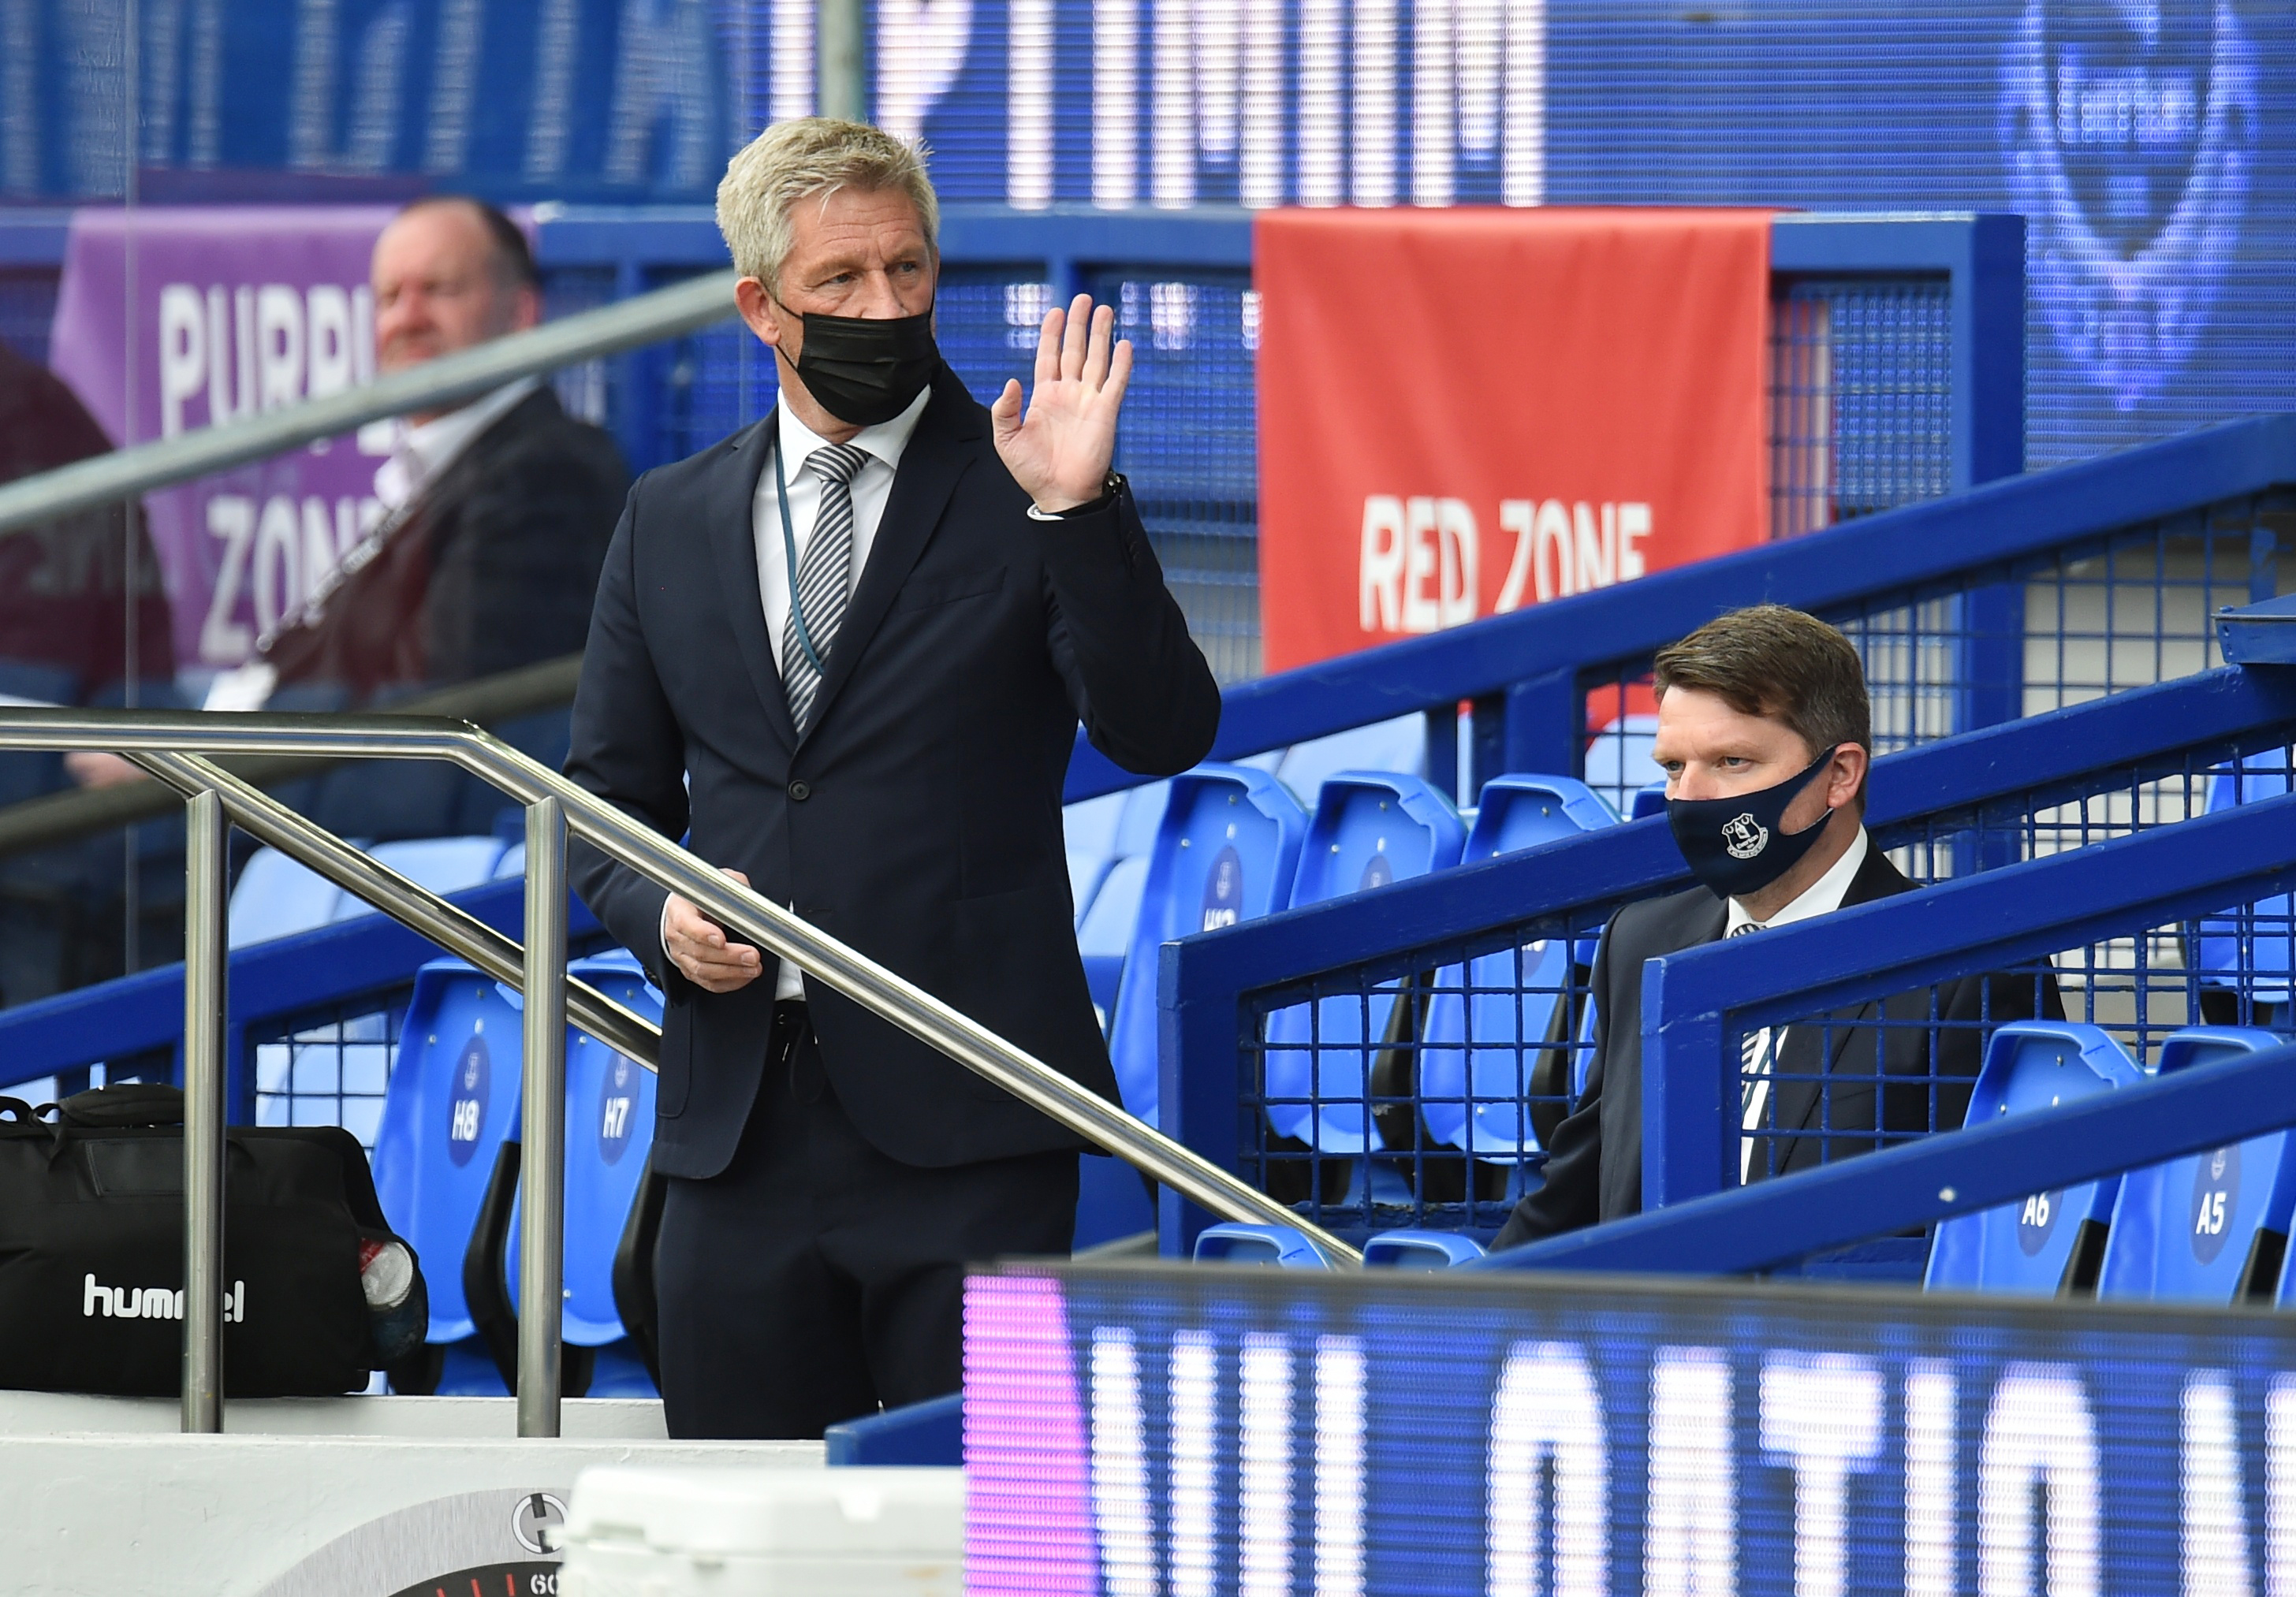 Soccer Football - Premier League - Everton v Southampton - Goodison Park, Liverpool, Britain - August 14, 2021 Everton director of football Marcel Brands before the match REUTERS/Peter Powell 